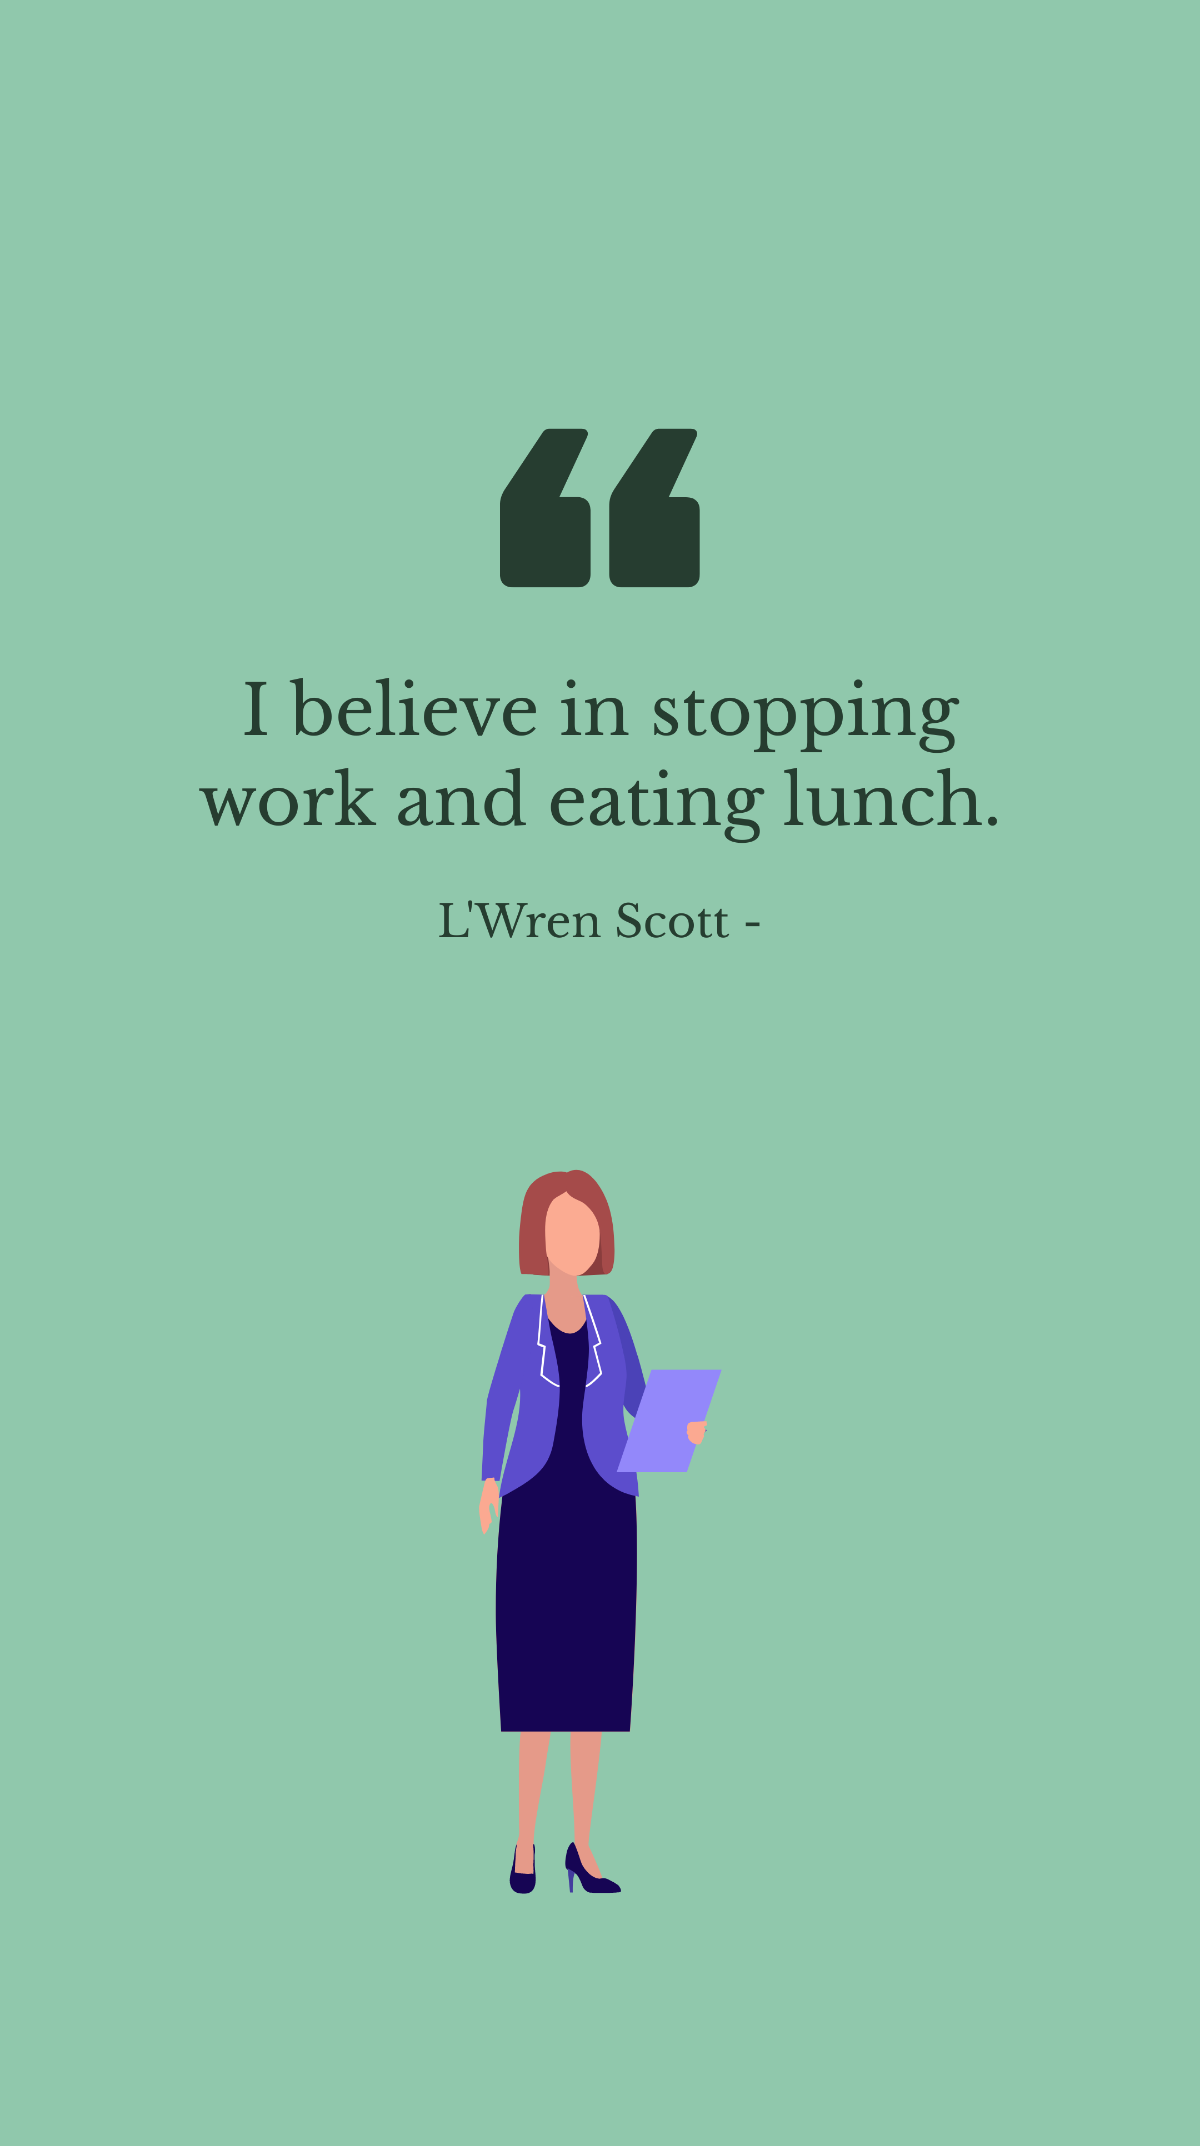 Free L'Wren Scott - I believe in stopping work and eating lunch. Template